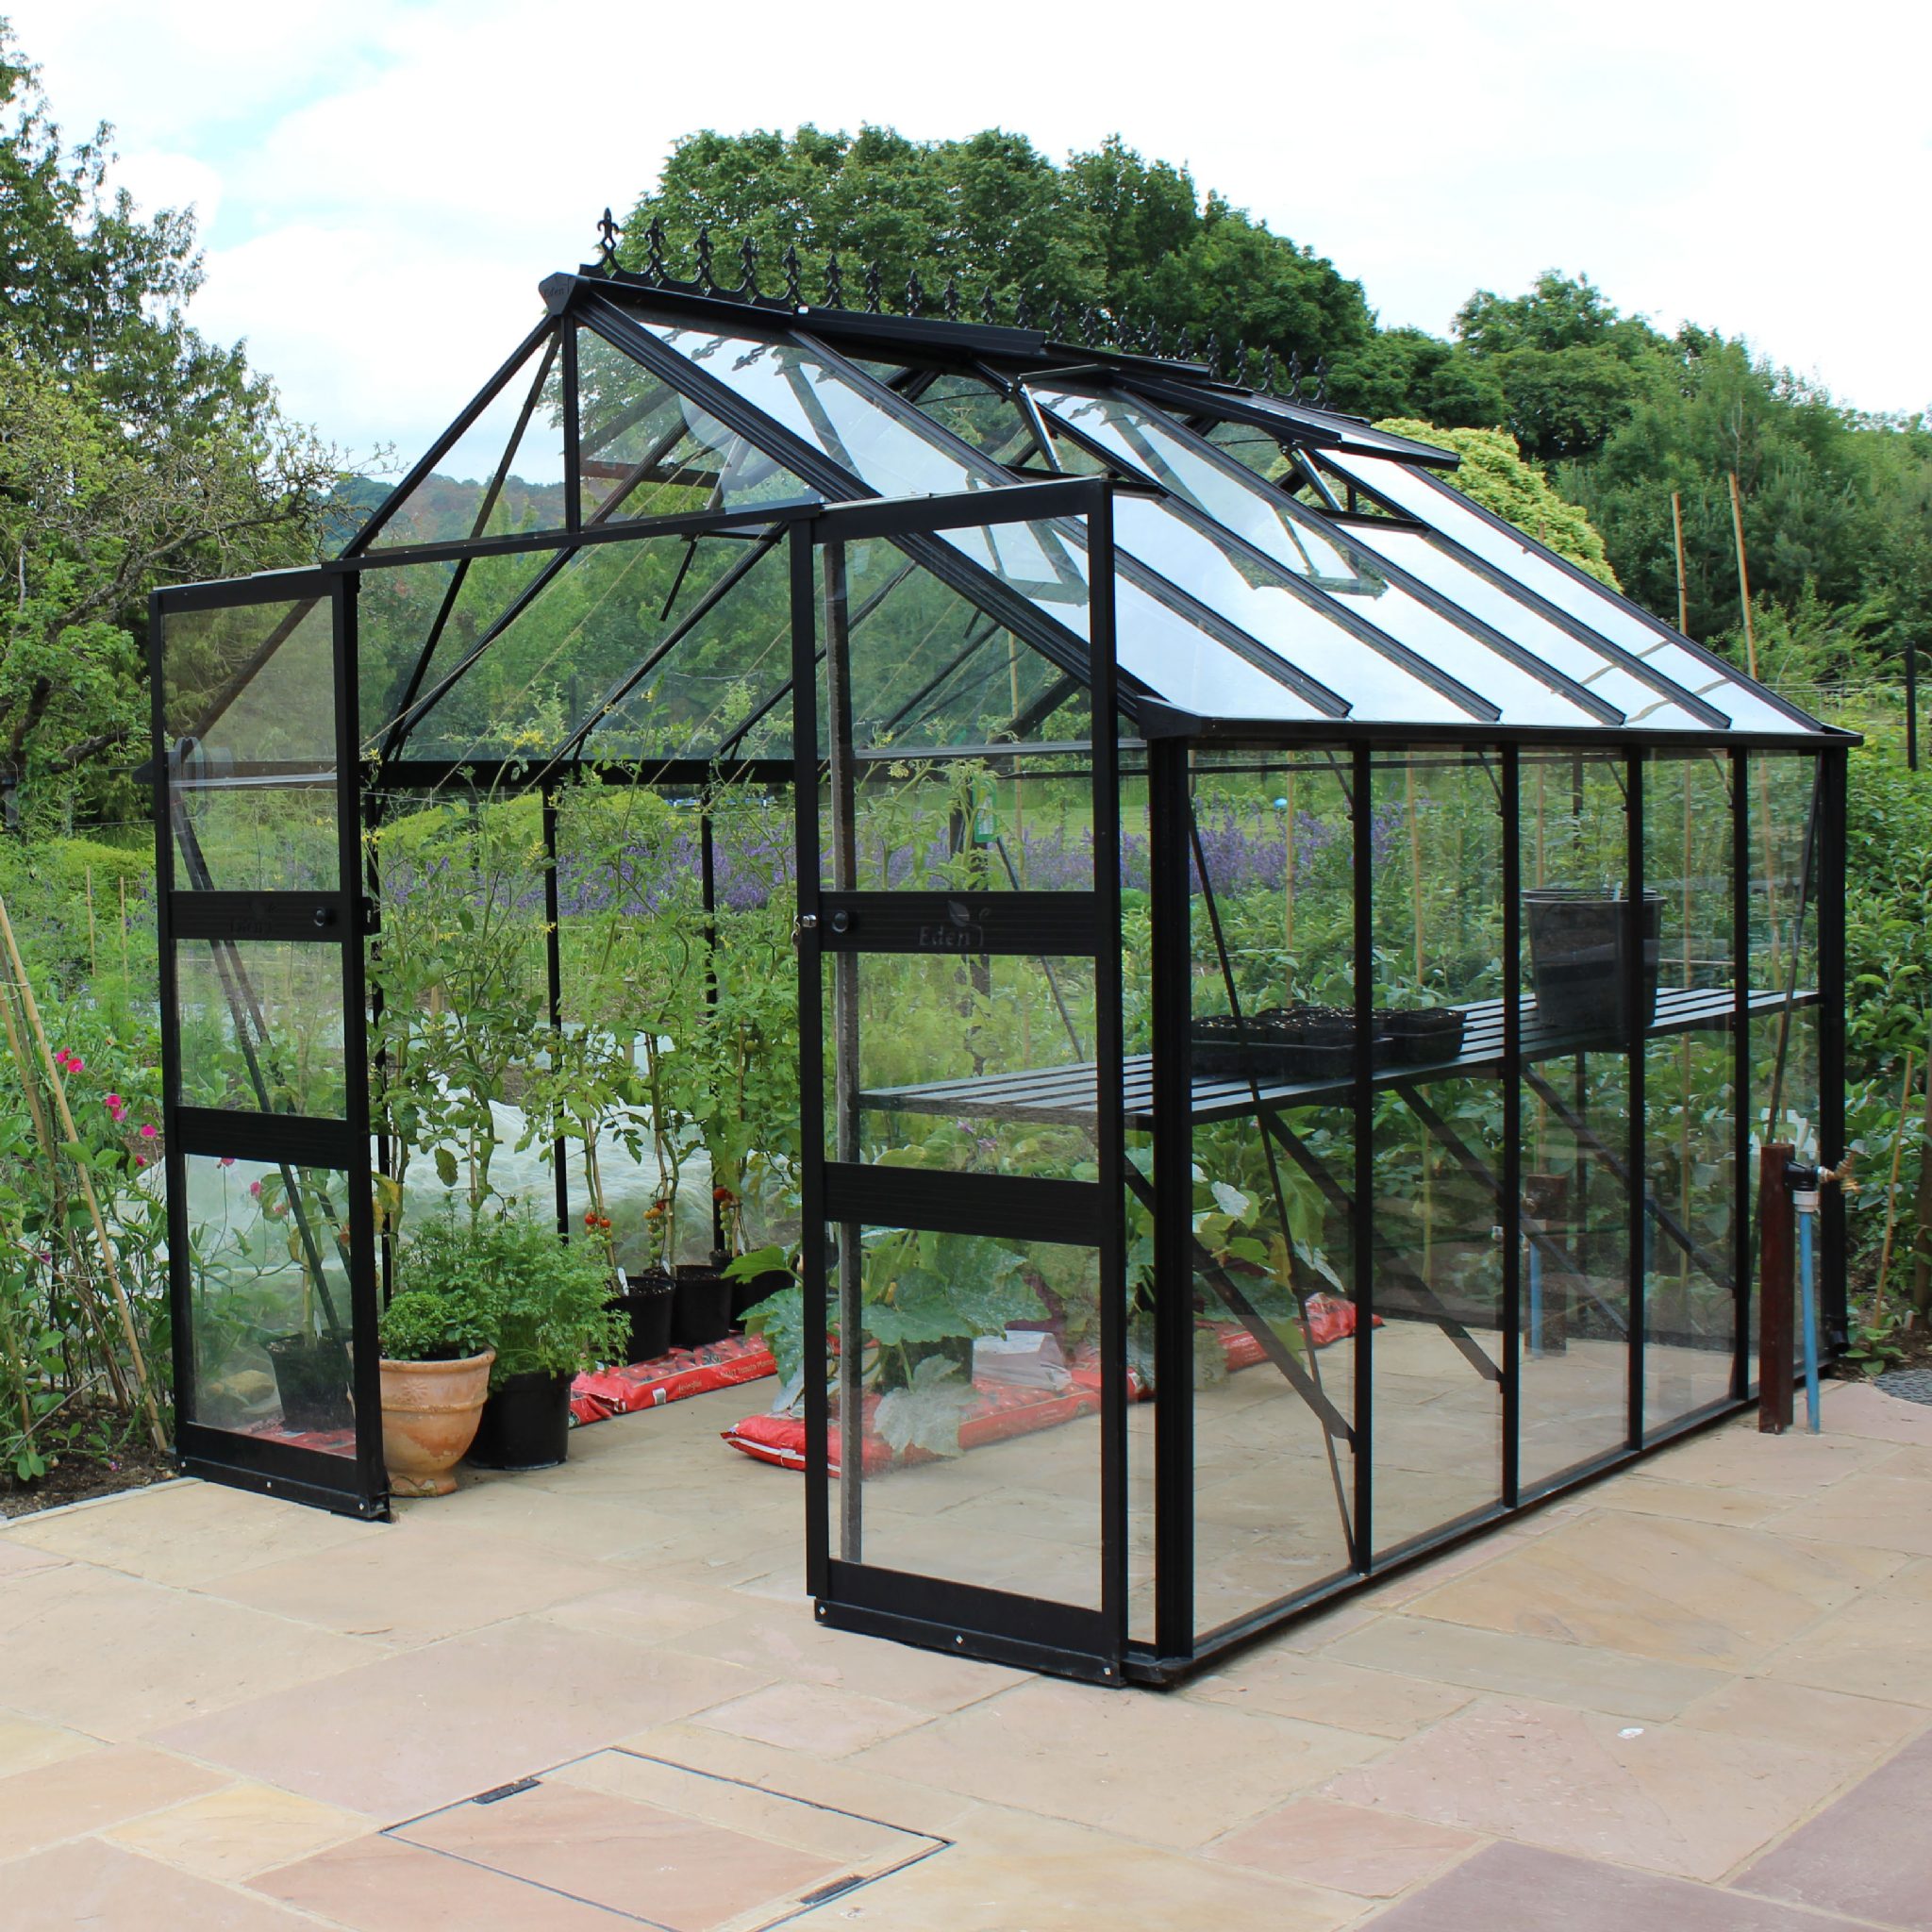 Featured image for “Halls Cotswold BLOCKLEY 814 Greenhouse (8x14)”